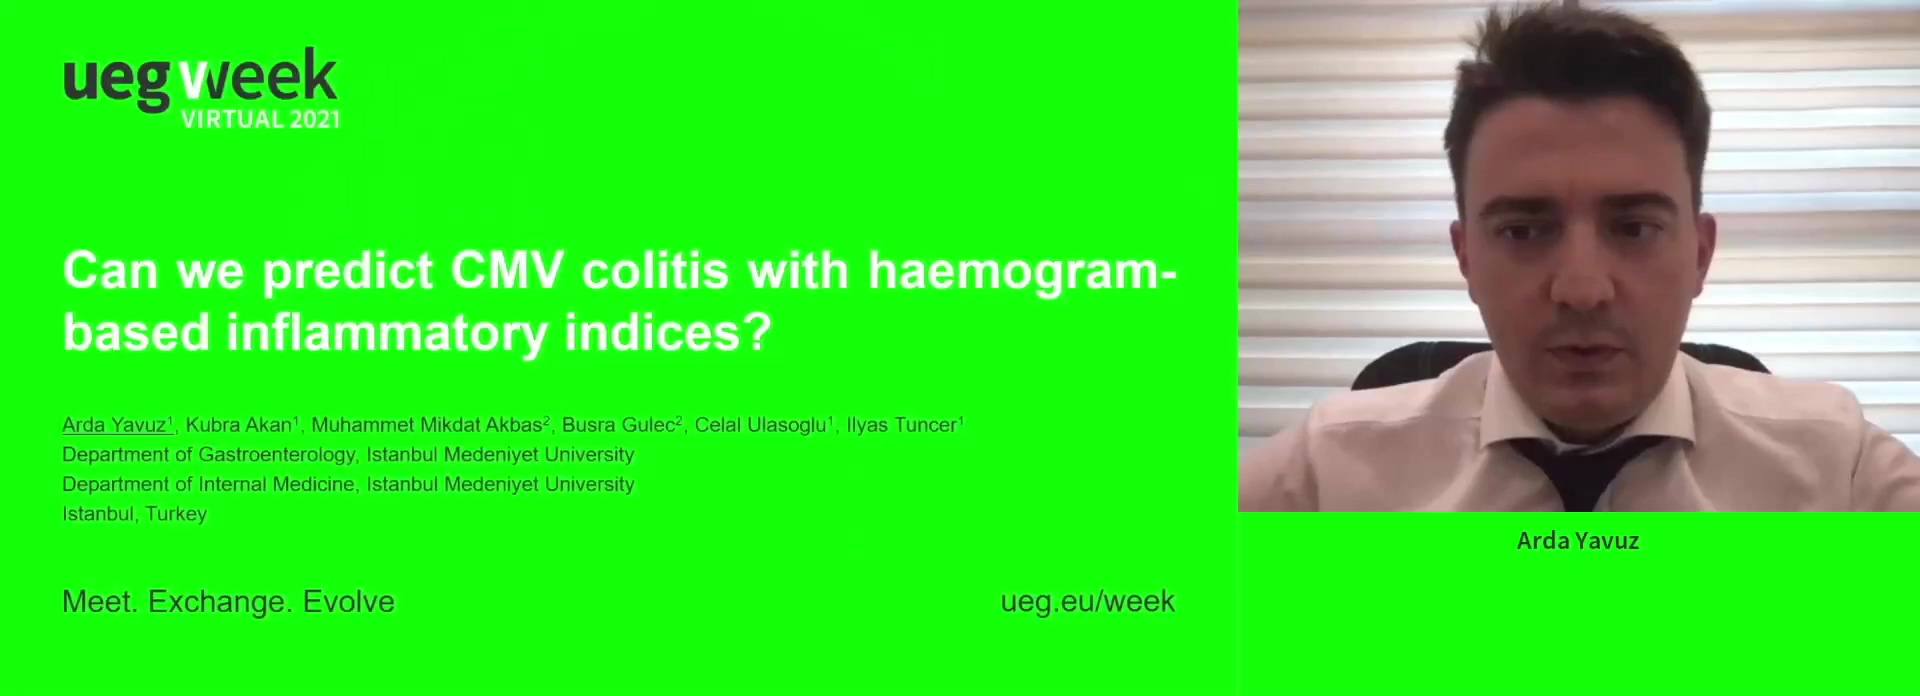 CAN WE PREDICT CMV COLITIS WITH HAEMOGRAM-BASED INFLAMMATORY INDICES?